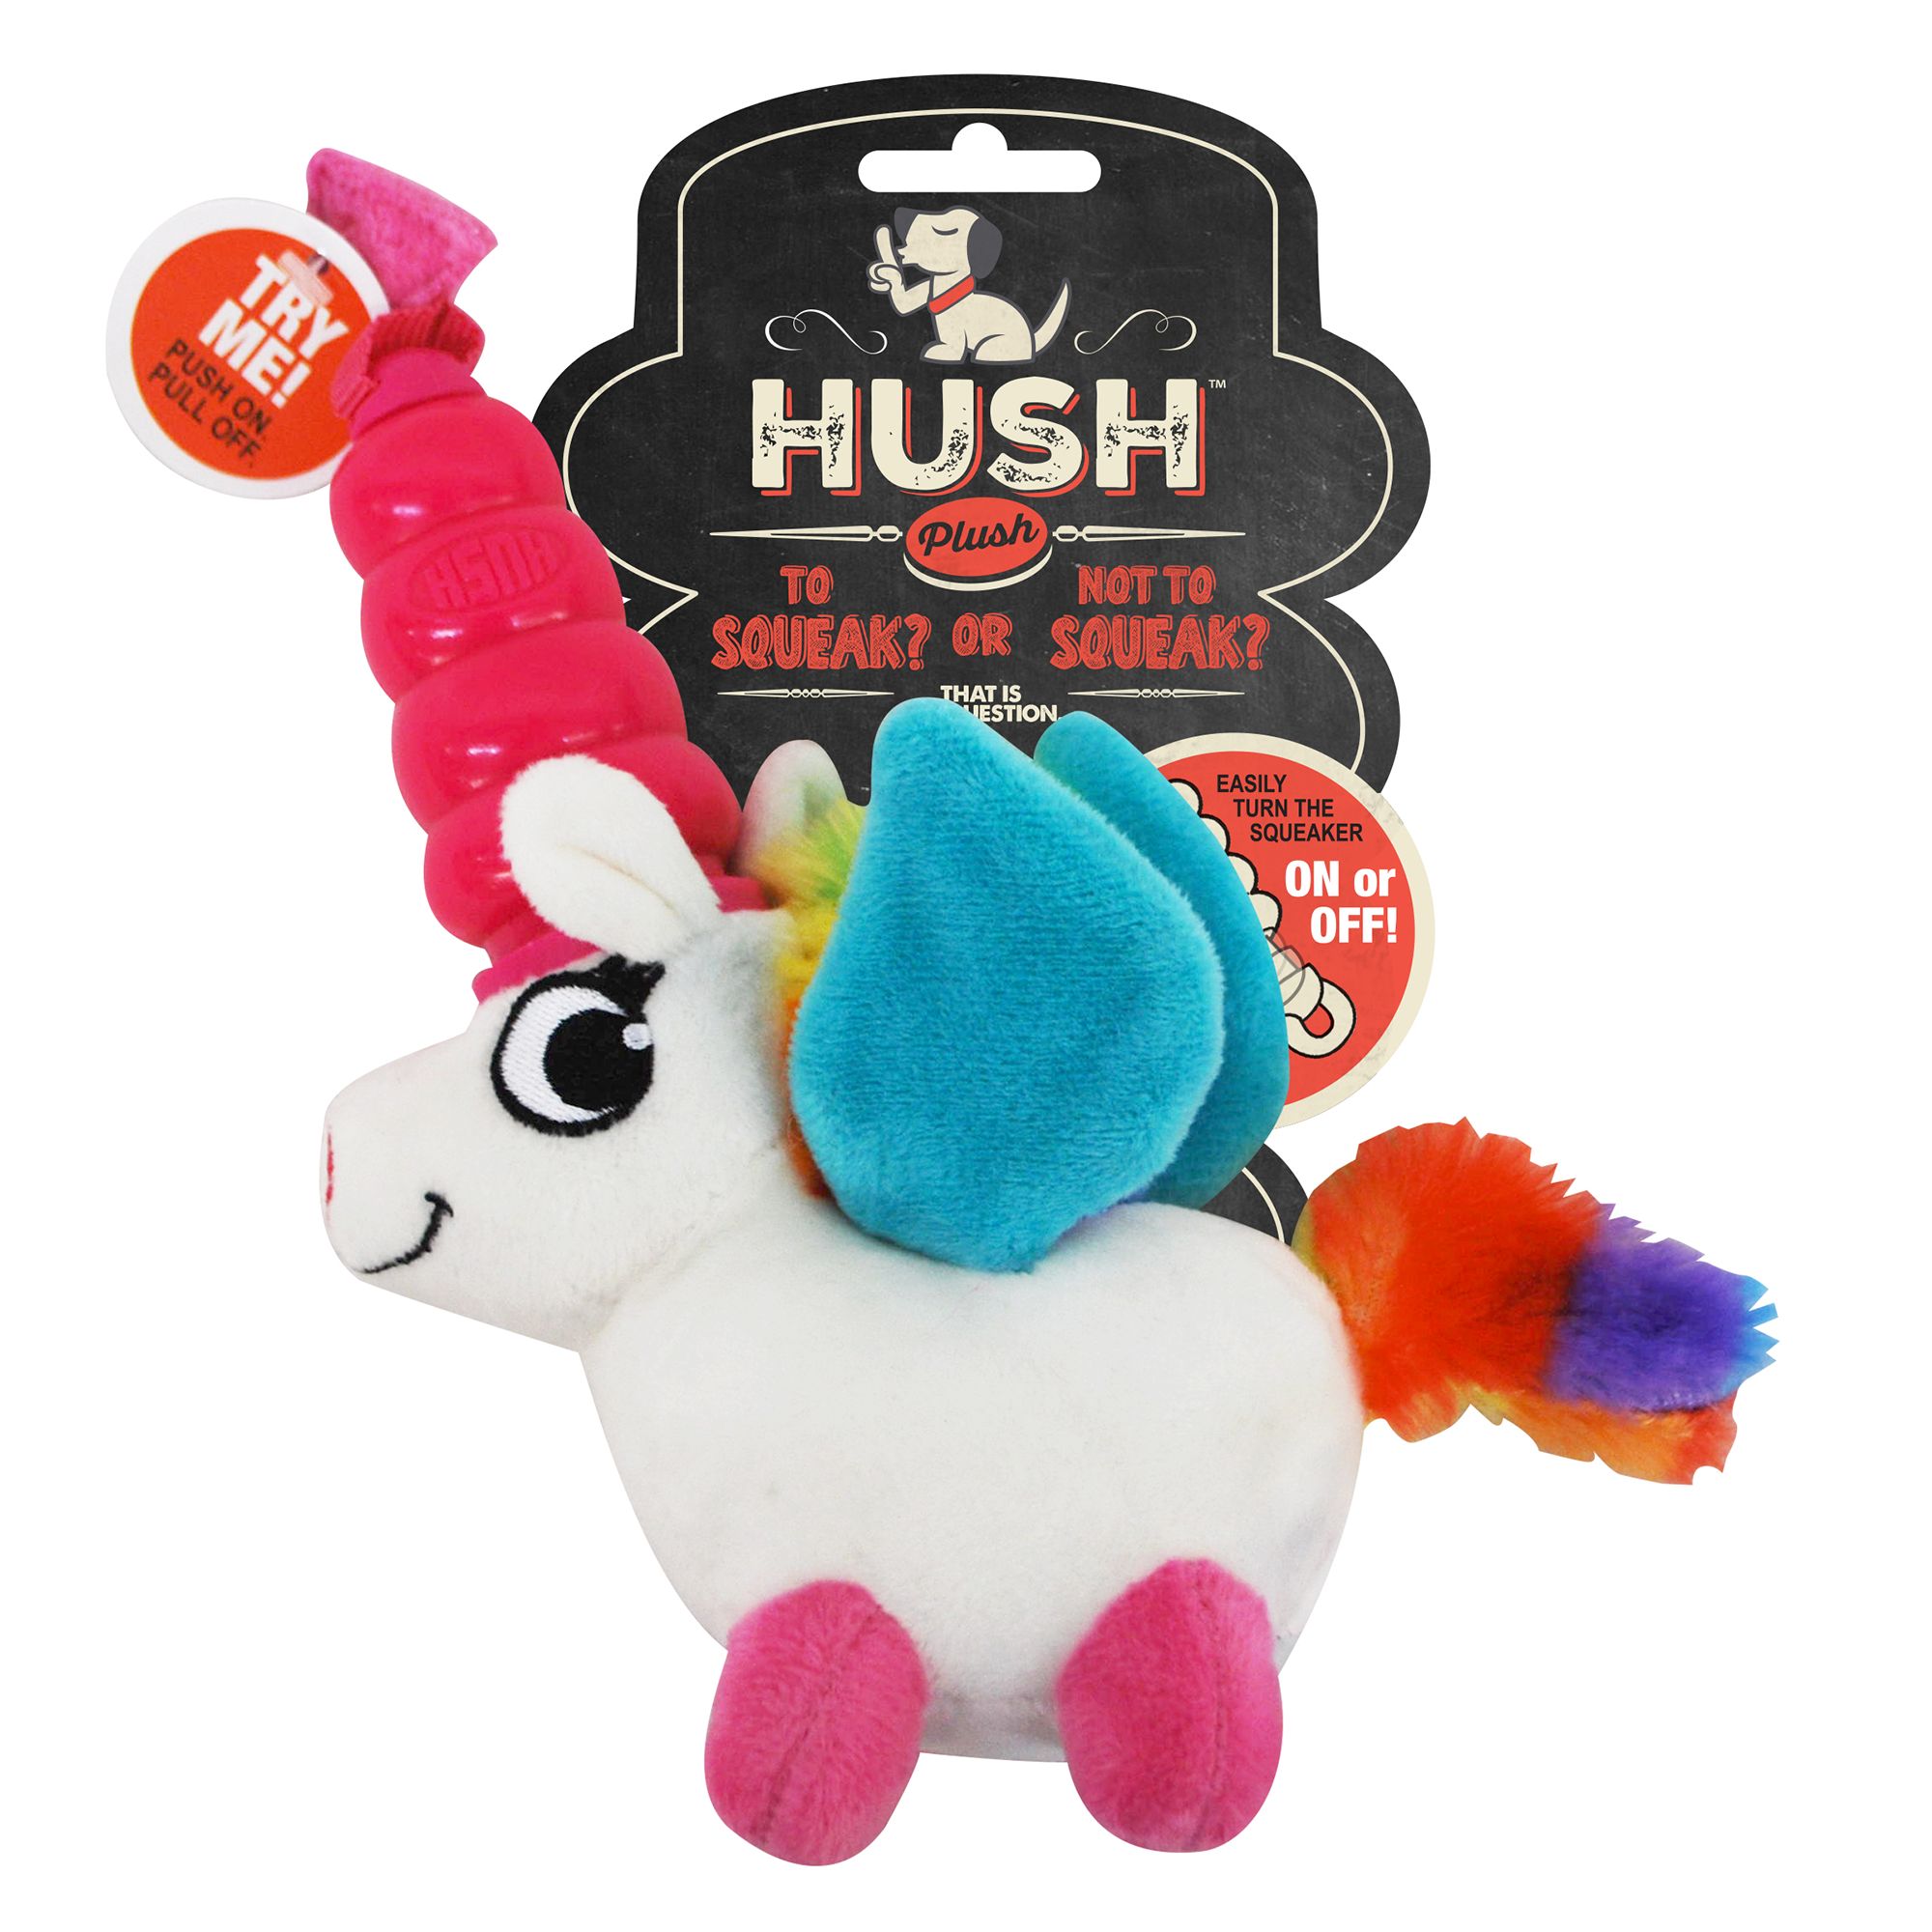 What Is A Unicorn Plush Worth In Adopt Me